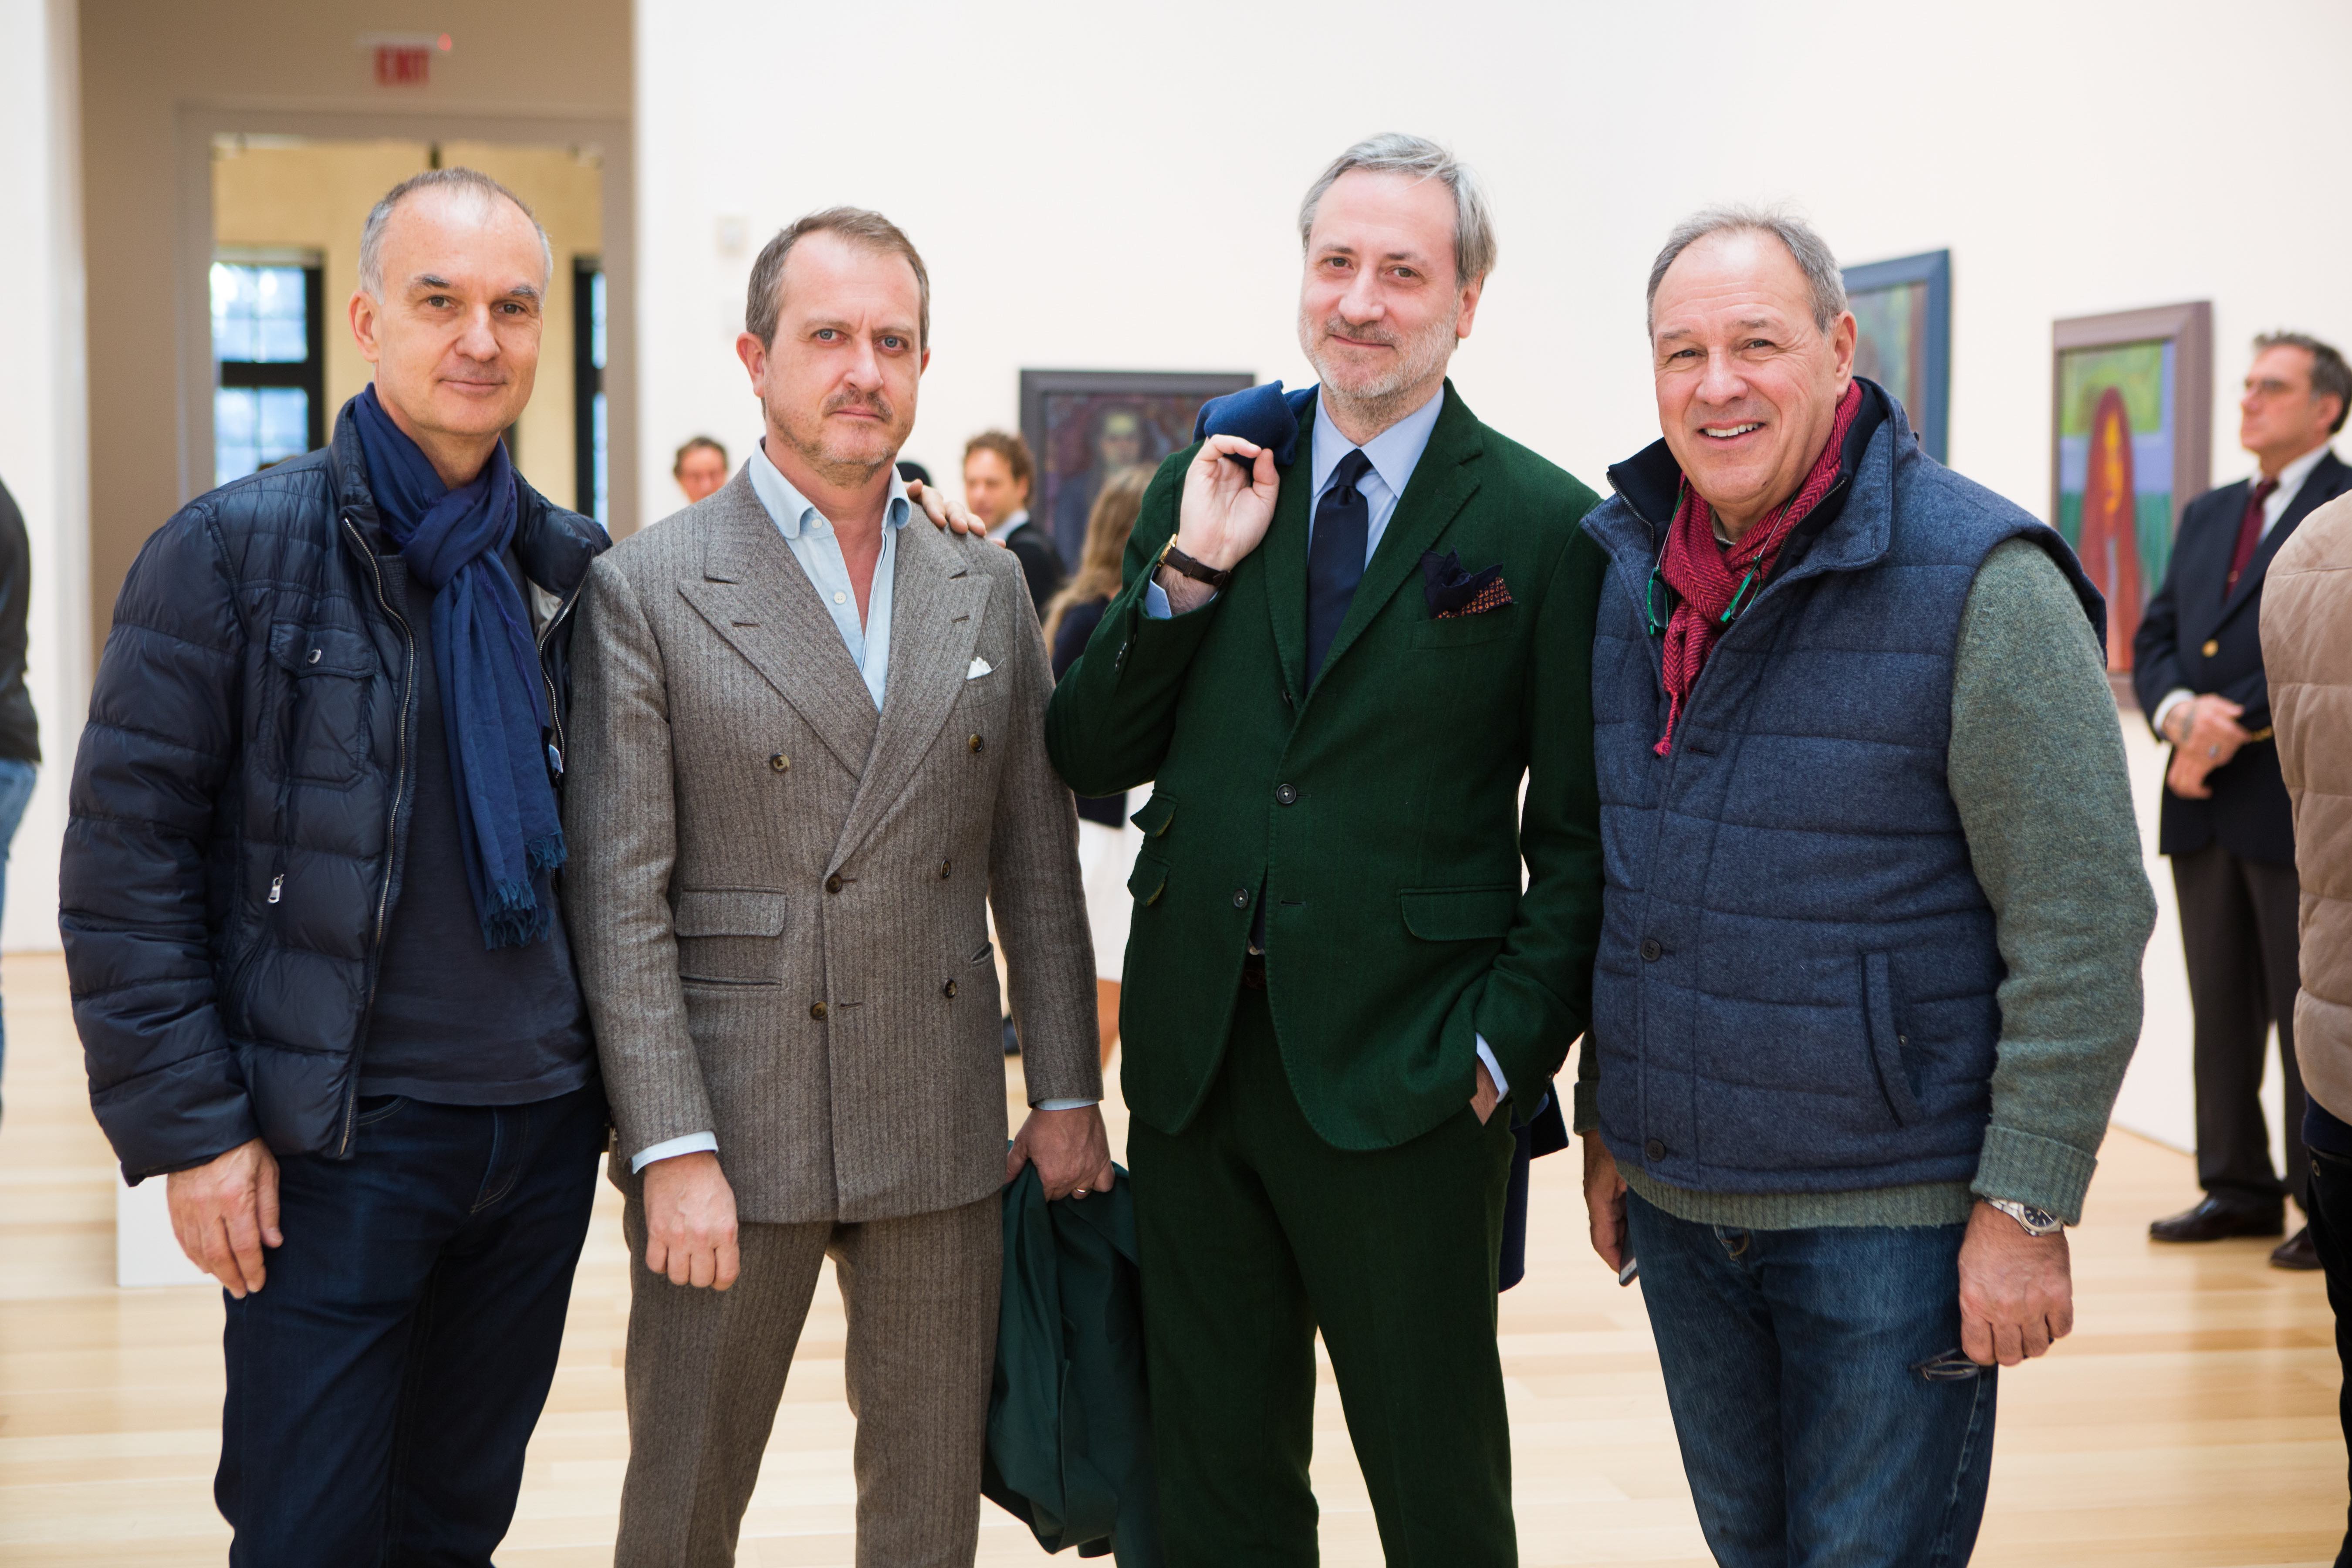 Lawrence Luhring, Franco Noero, Pierpaolo Falone, Roland Augustine